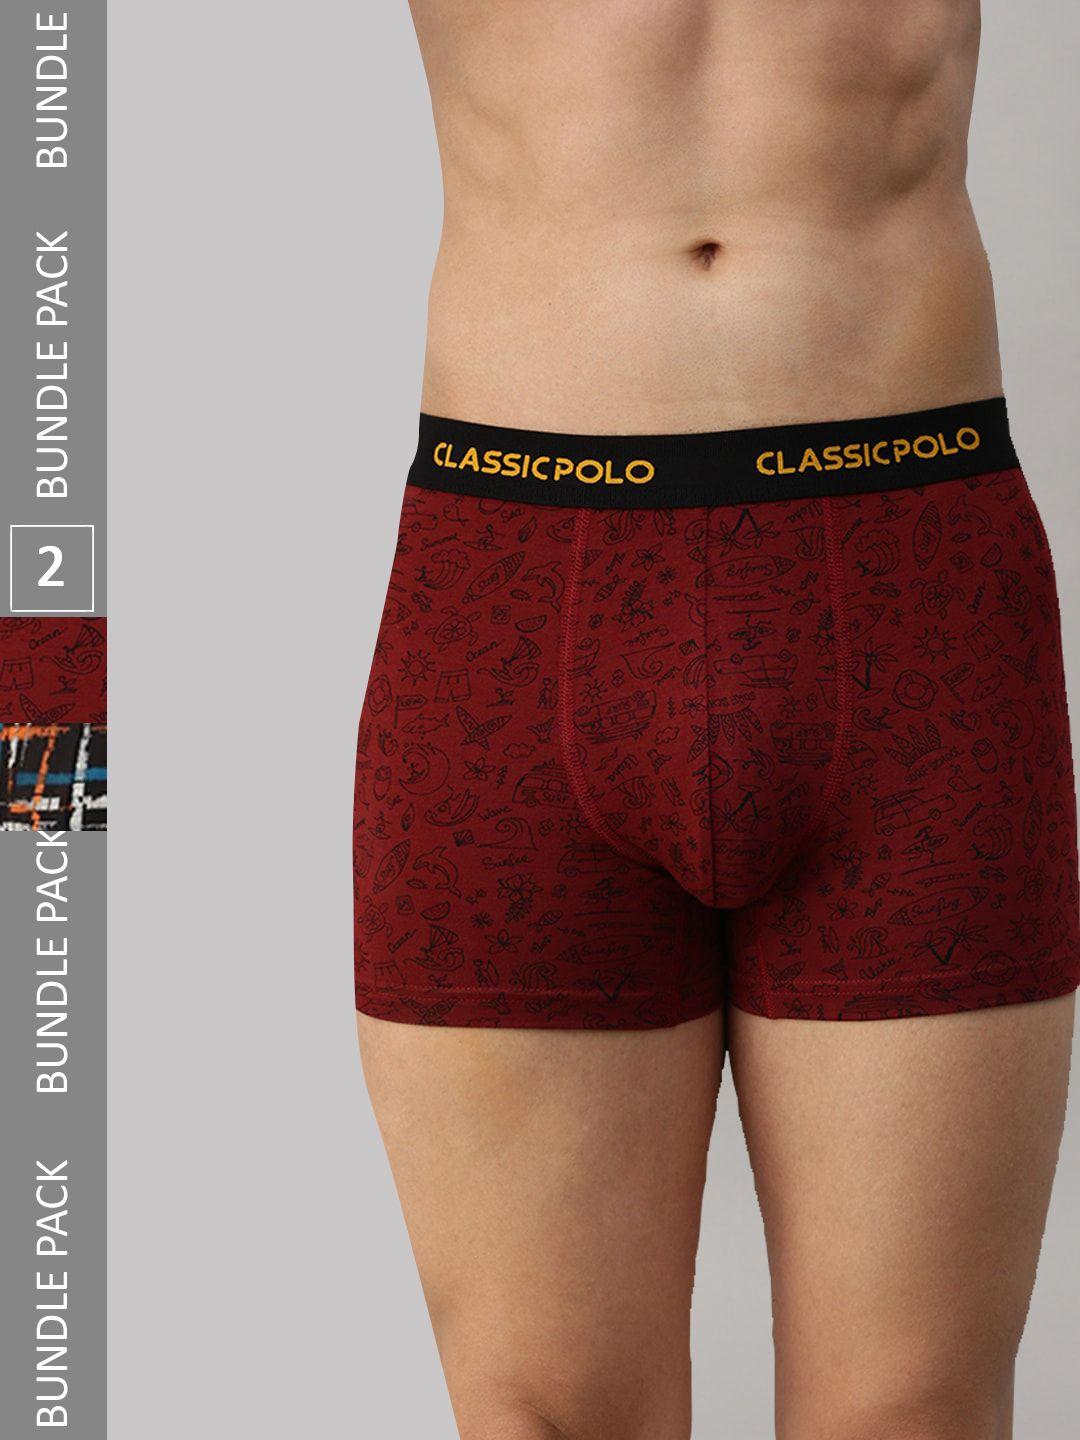 classic polo pack of 2 printed modal trunks